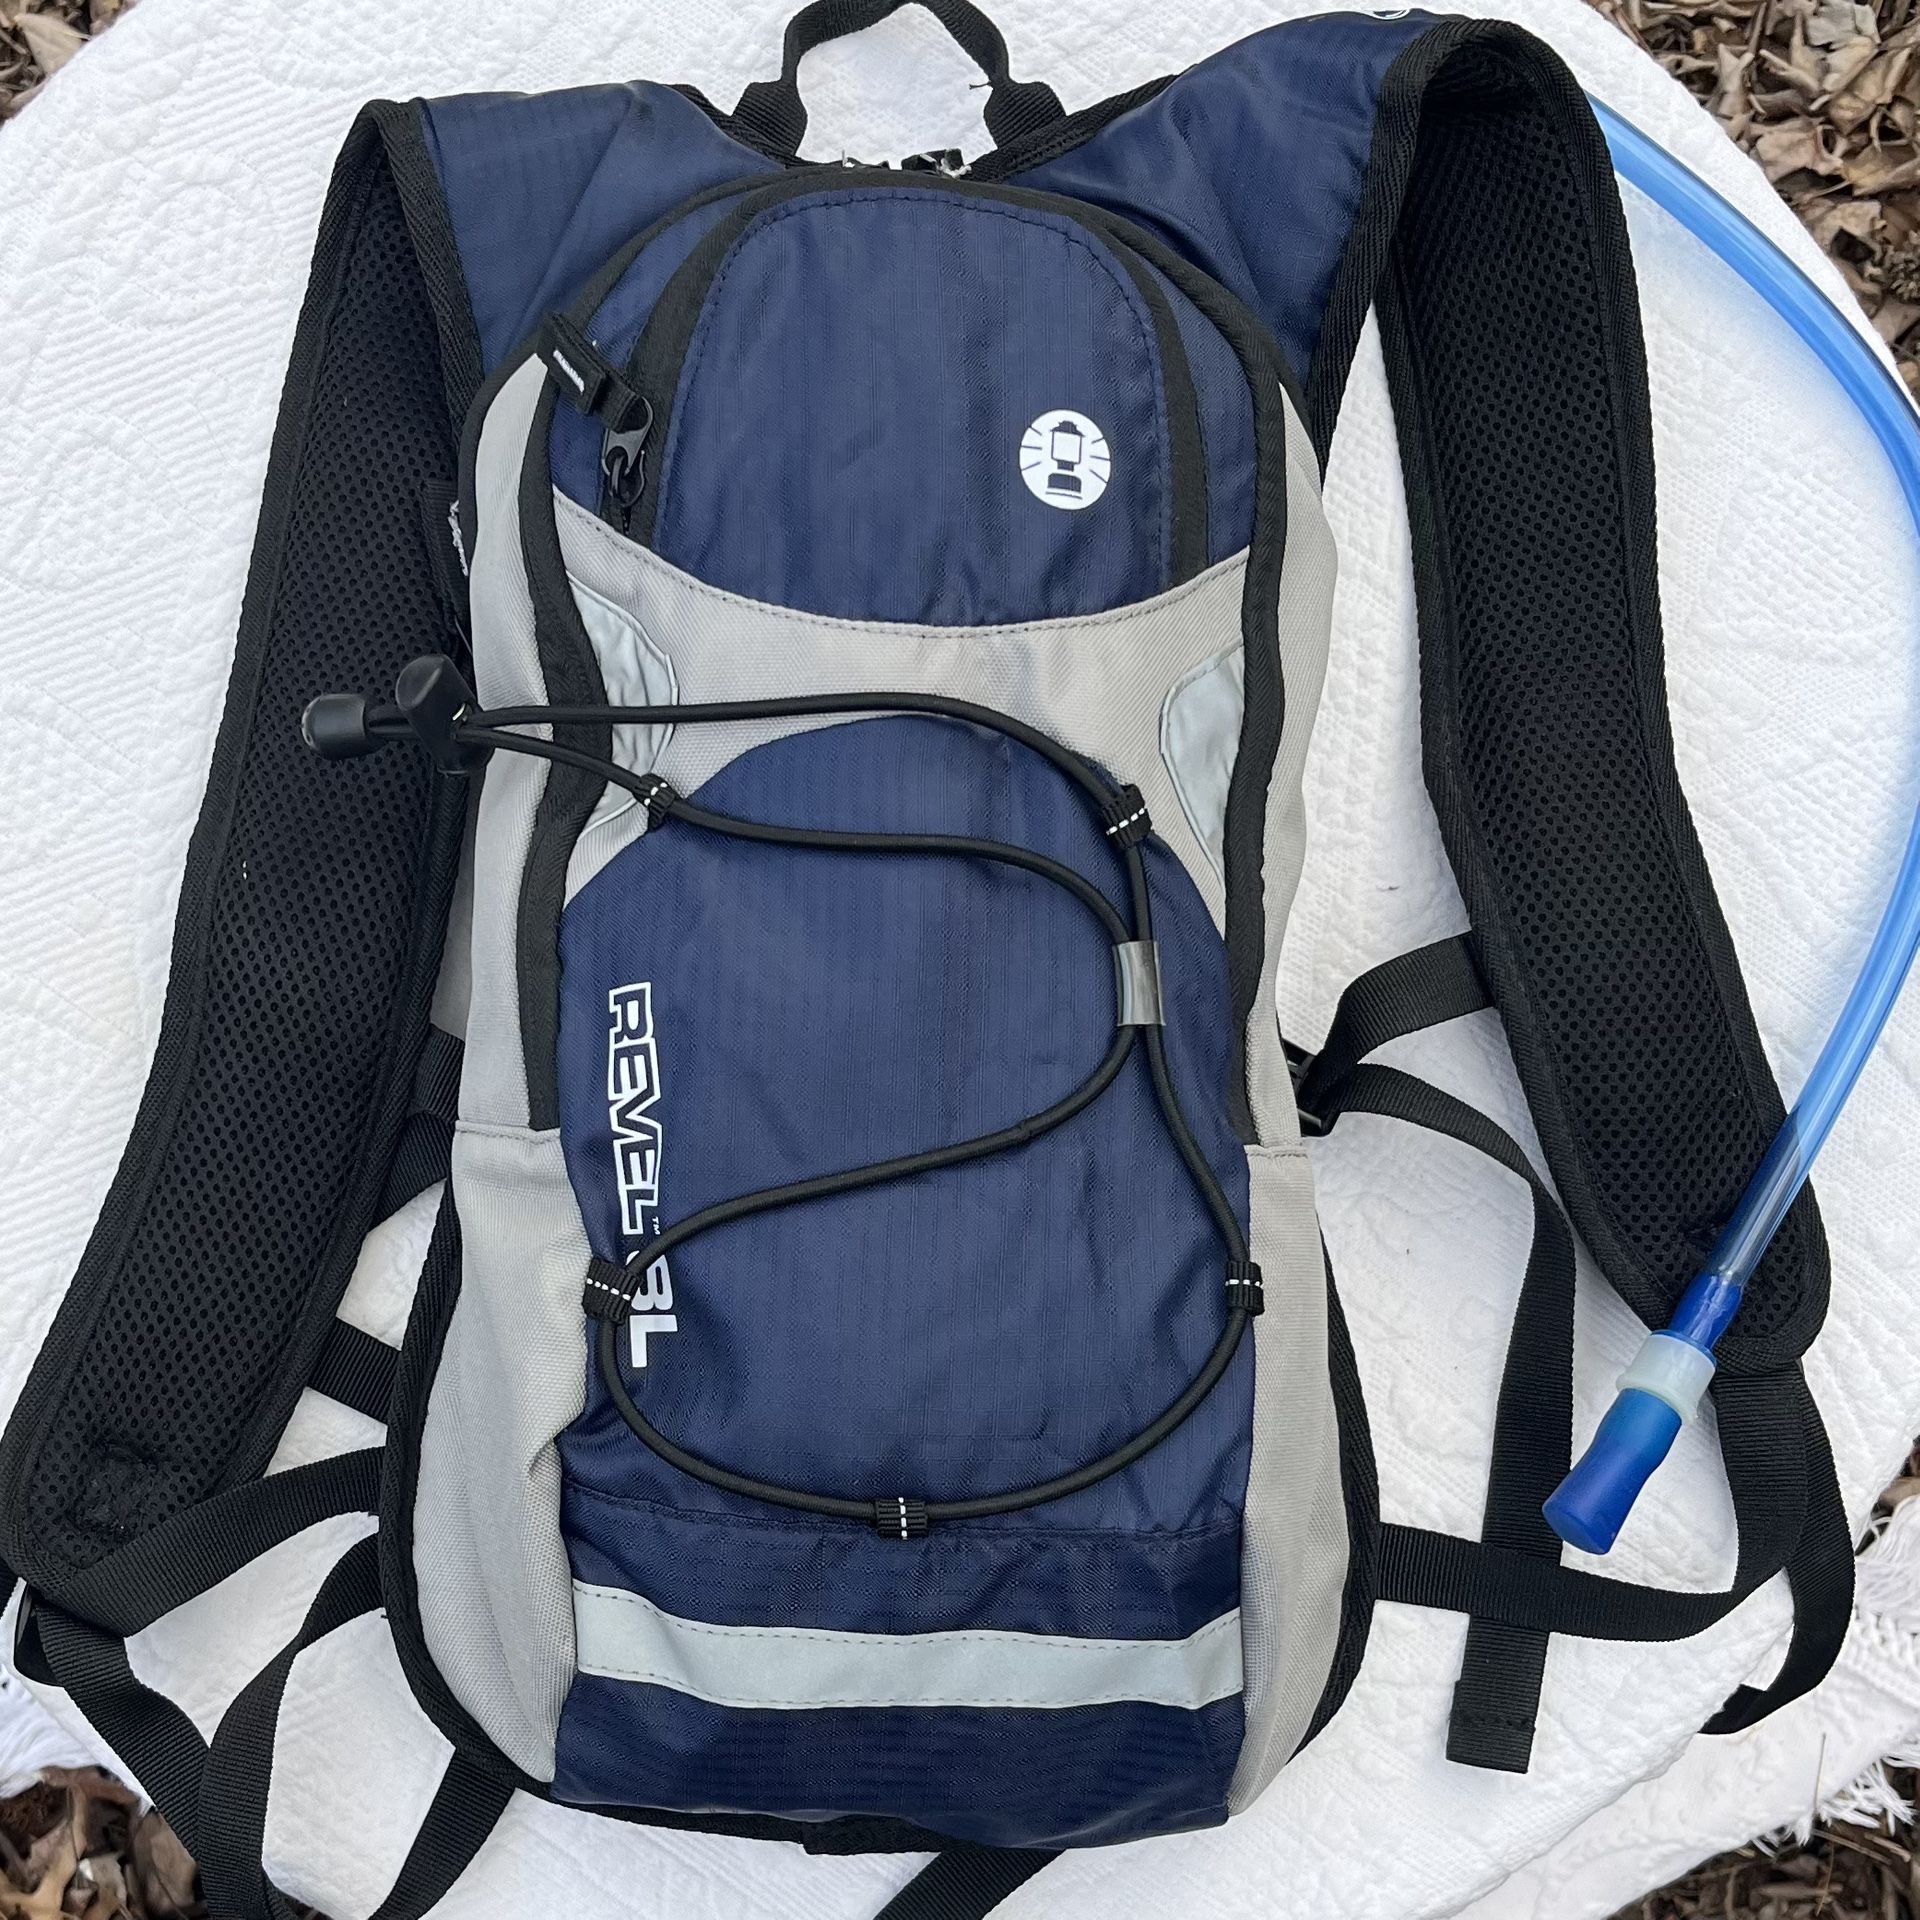 Coleman Hydration Backpack 8L